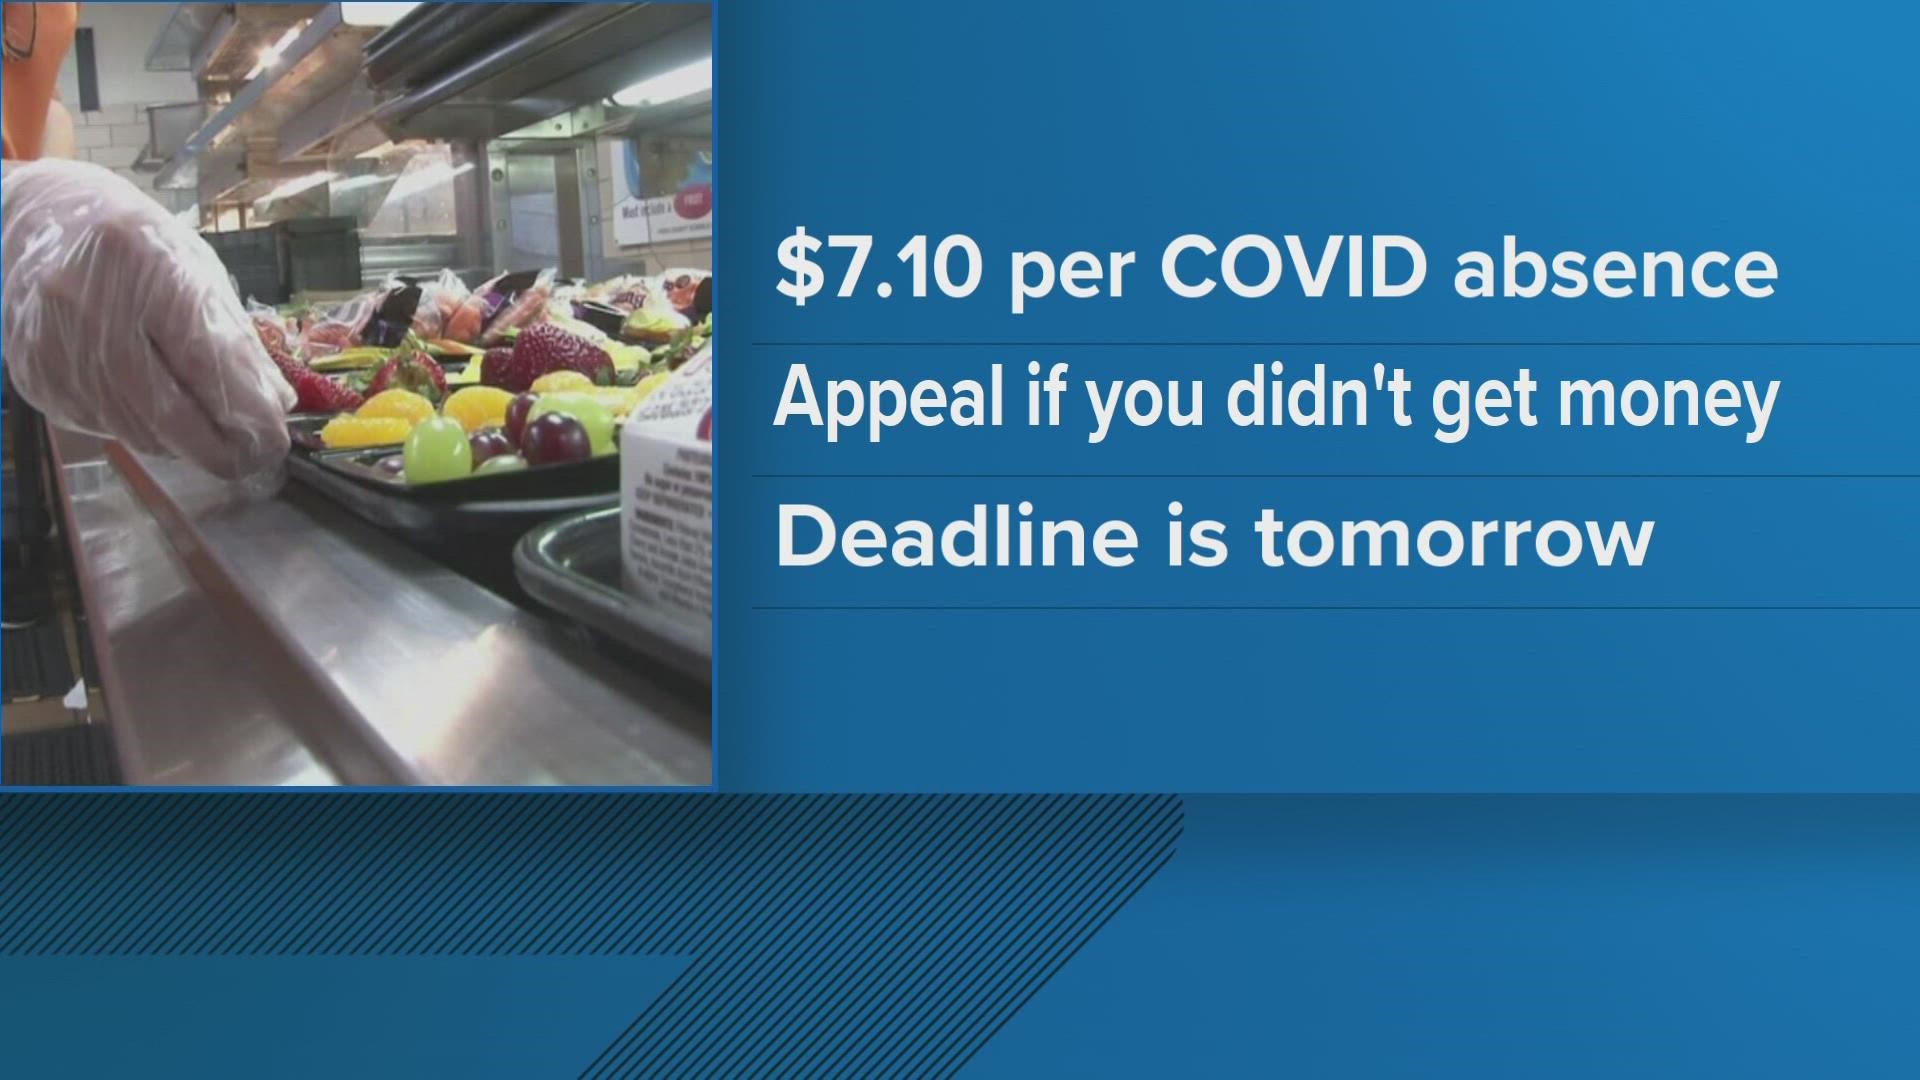 It said an appeal may be an option for children who participated in the National School Lunch Program and had COVID-19-related absences but did not receive P-EBT.